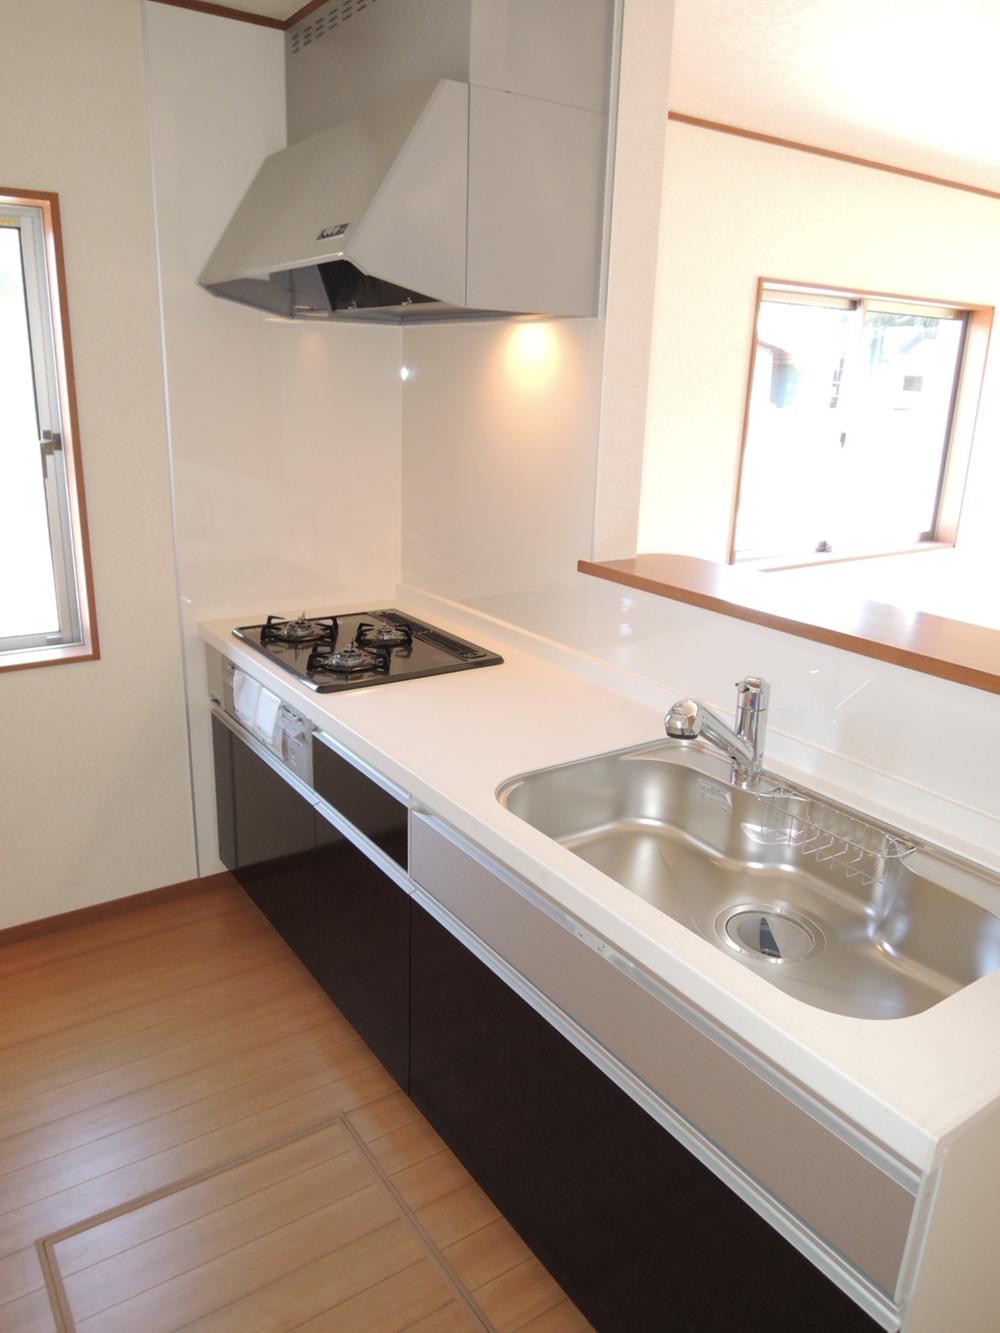 Same specifications photo (kitchen). Face-to-face kitchen (same specifications)